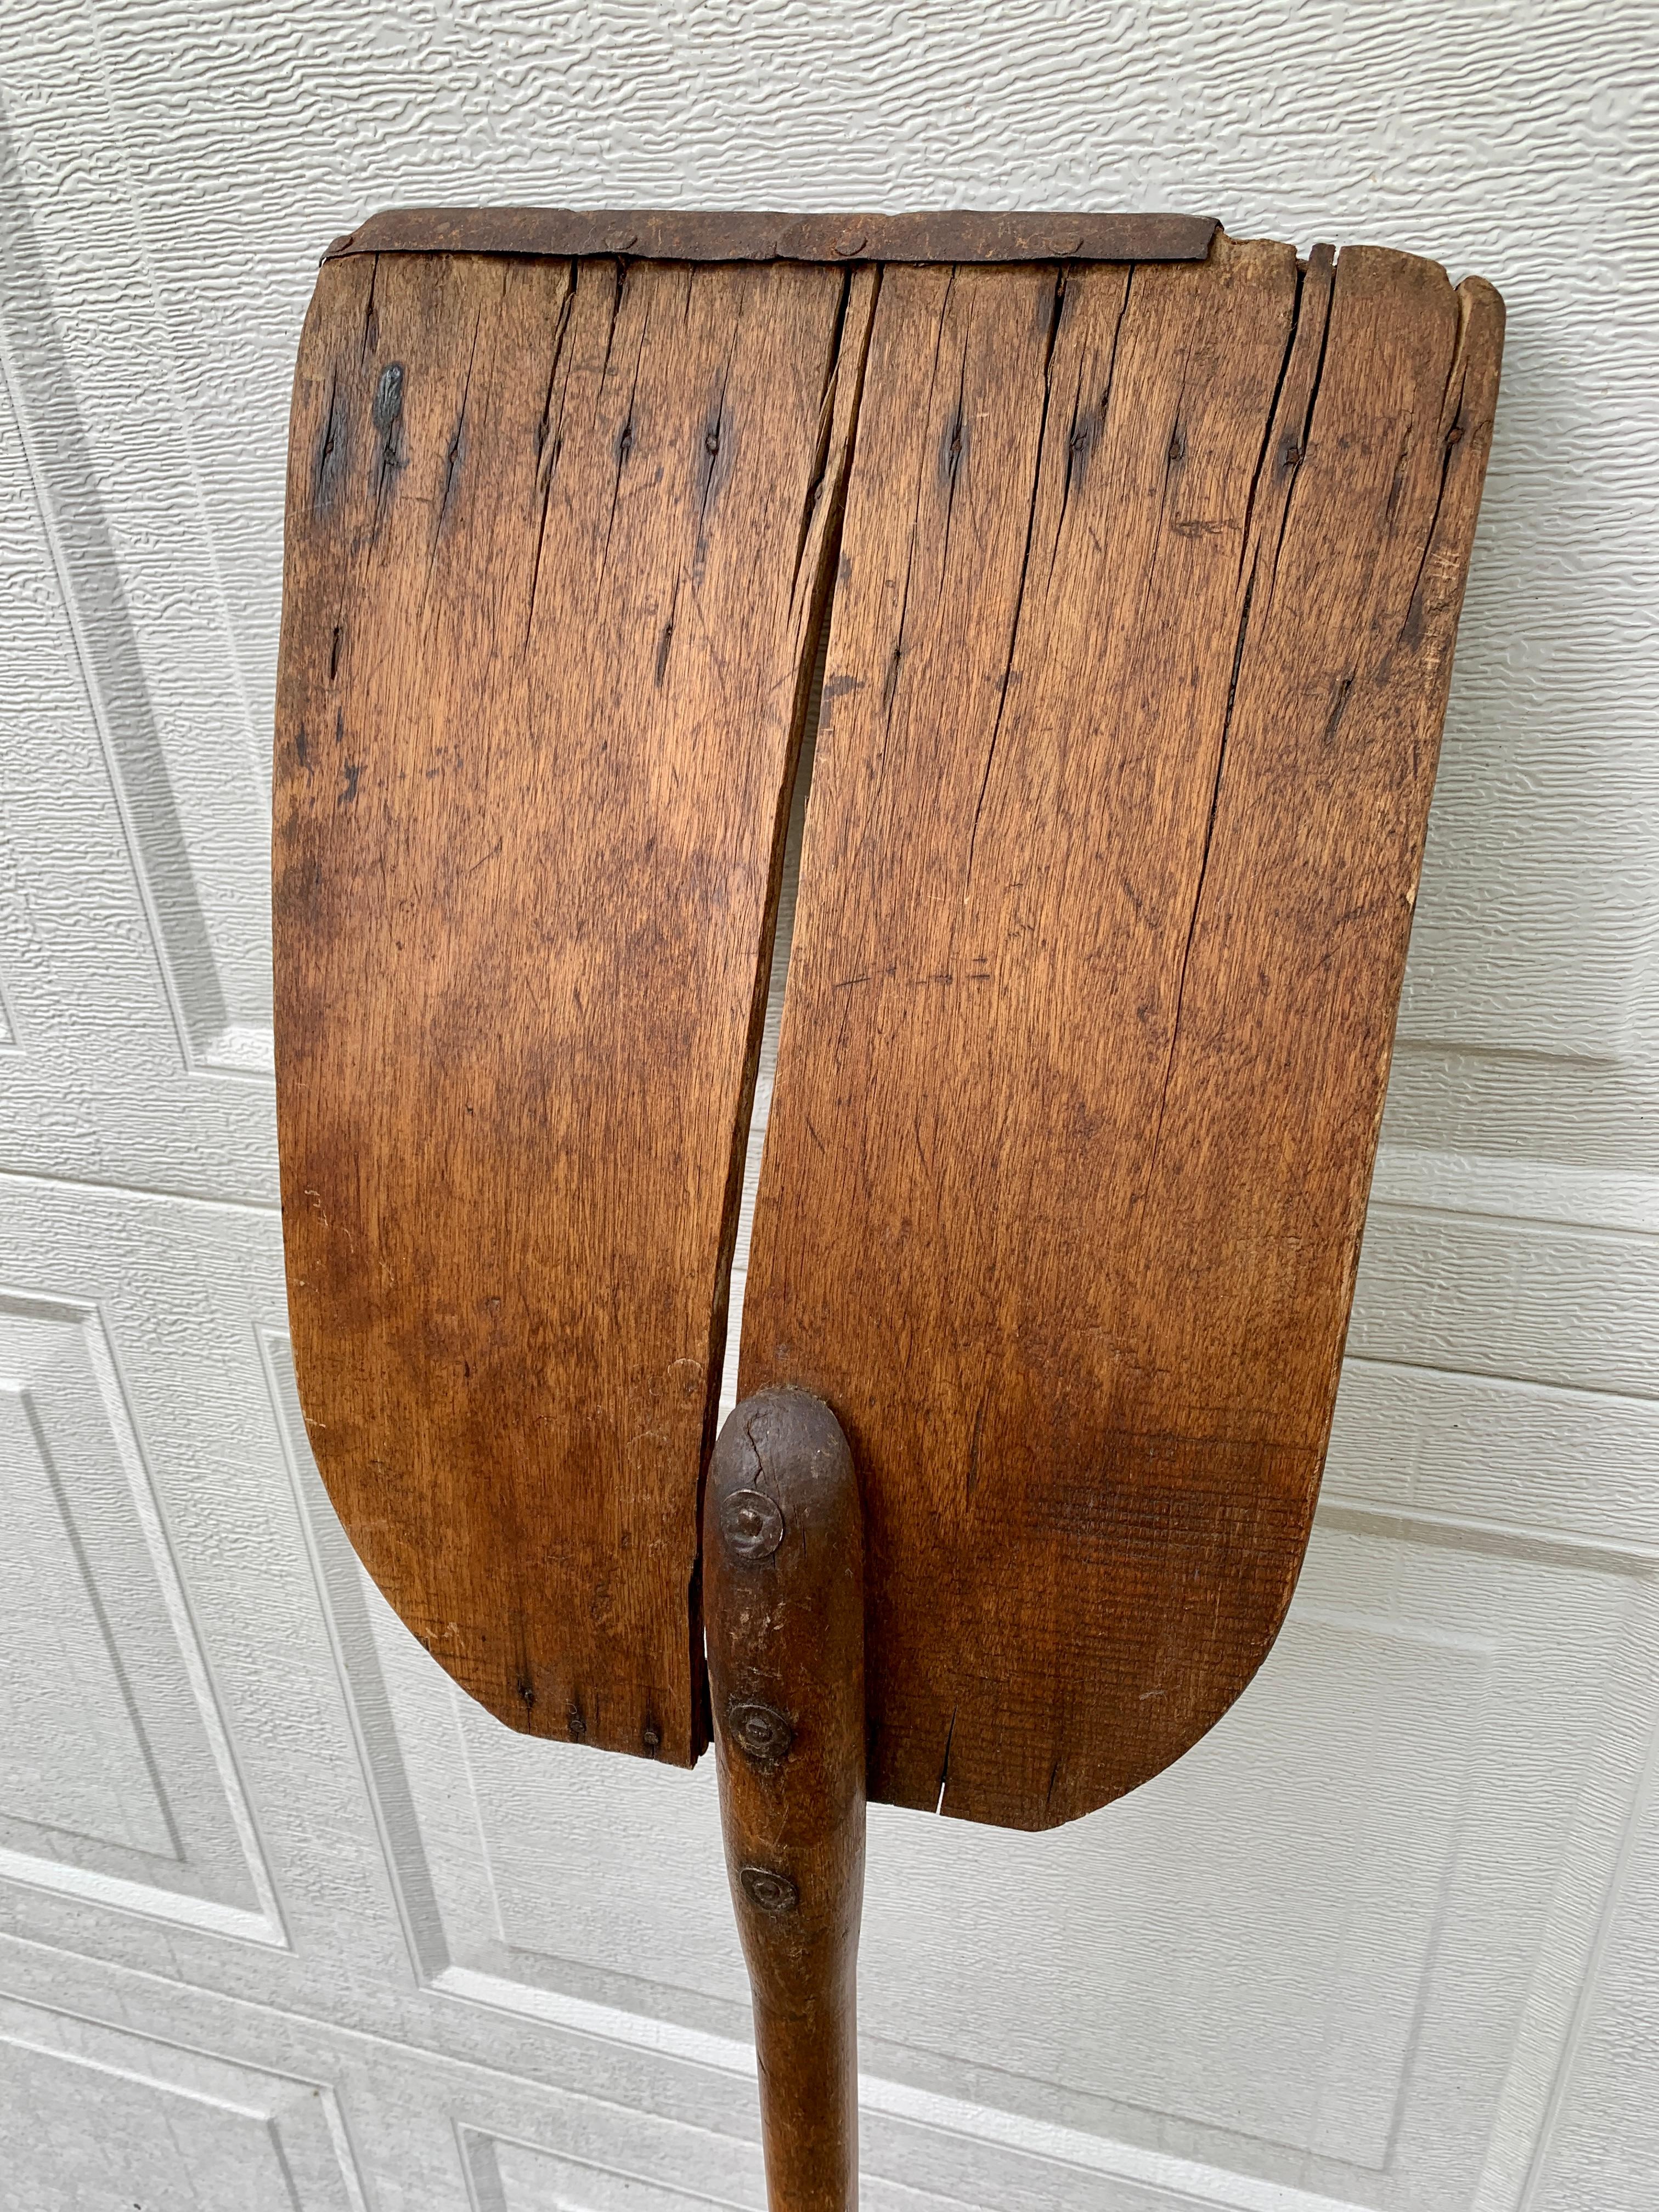 Antique 19th Century Hand Made Wooden Grain Shovel For Sale 3